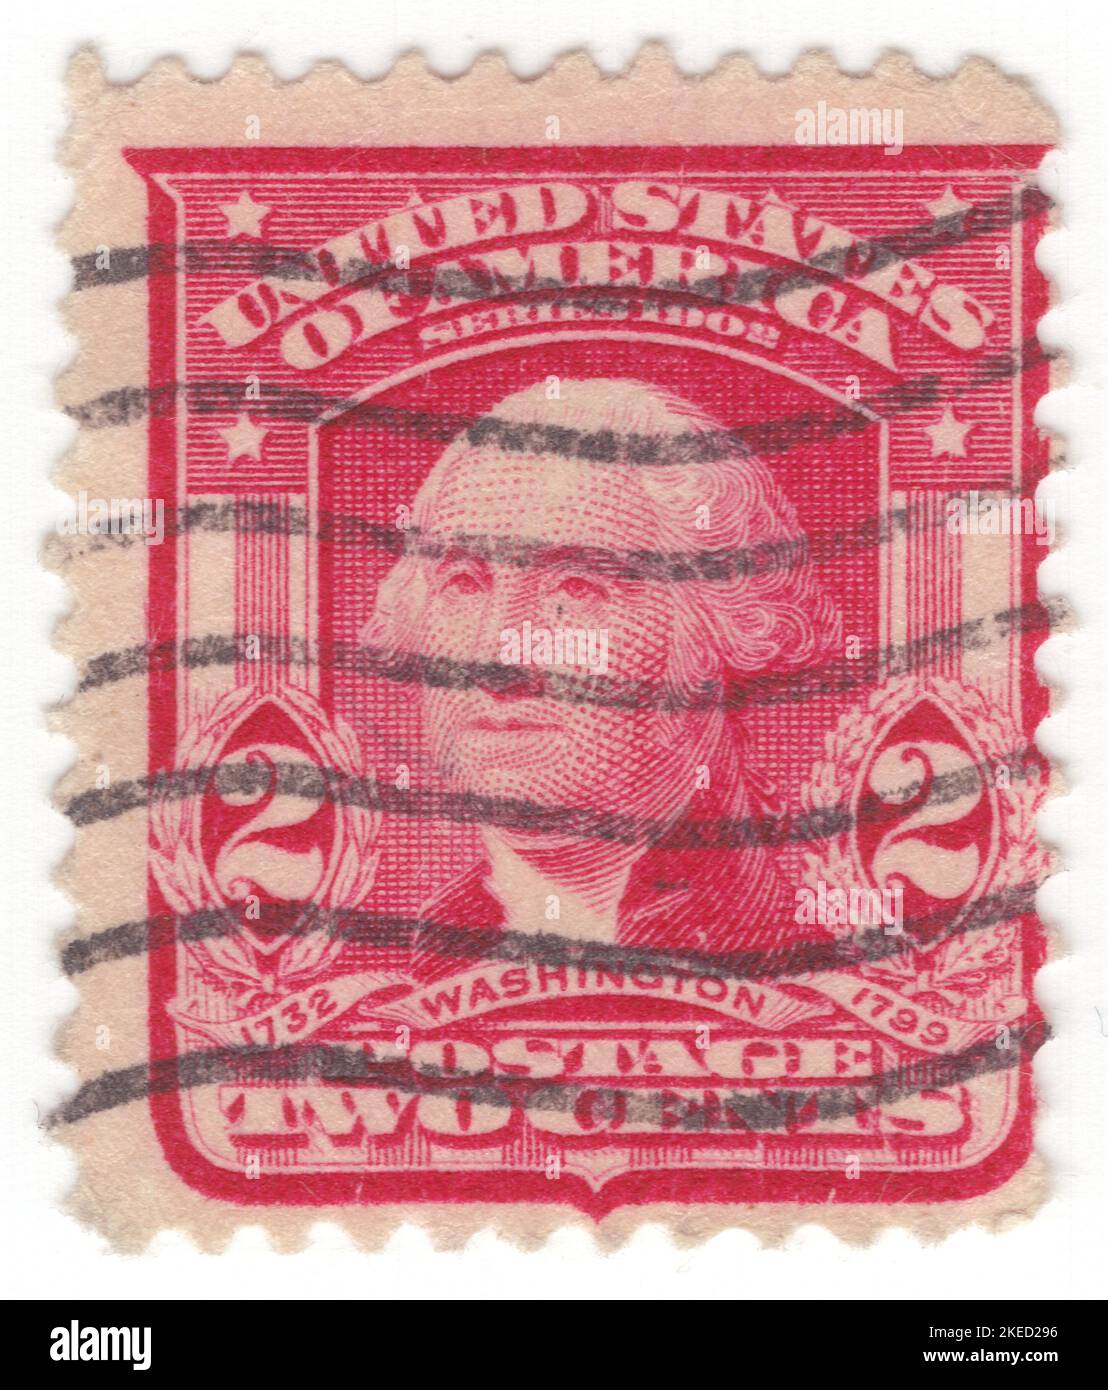 USA - 1903: An 2 cents carmine-rose postage stamp depicting portrait of George Washington. American military officer, statesman, and Founding Father who served as the first president of the United States from 1789 to 1797. Appointed by the Continental Congress as commander of the Continental Army, Washington led the Patriot forces to victory in the American Revolutionary War and served as the president of the Constitutional Convention of 1787, which created the Constitution of the United States and the American federal government. Washington has been called the 'Father of his Country' Stock Photo